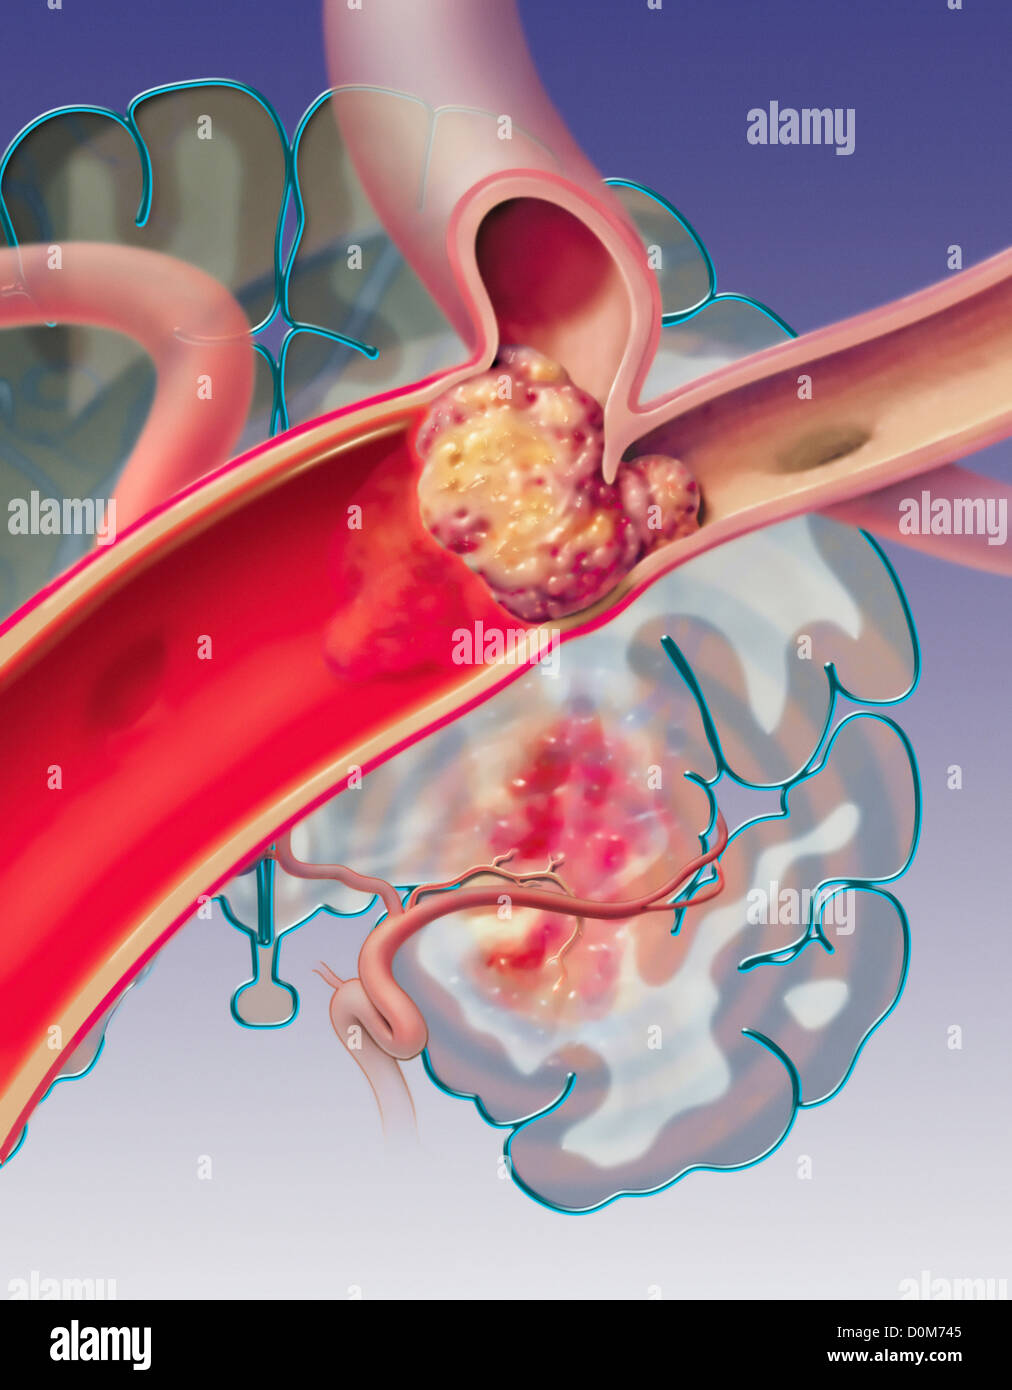 Illustration of a Cerebral Artery Blocked by a Blood Clot Stock Photo